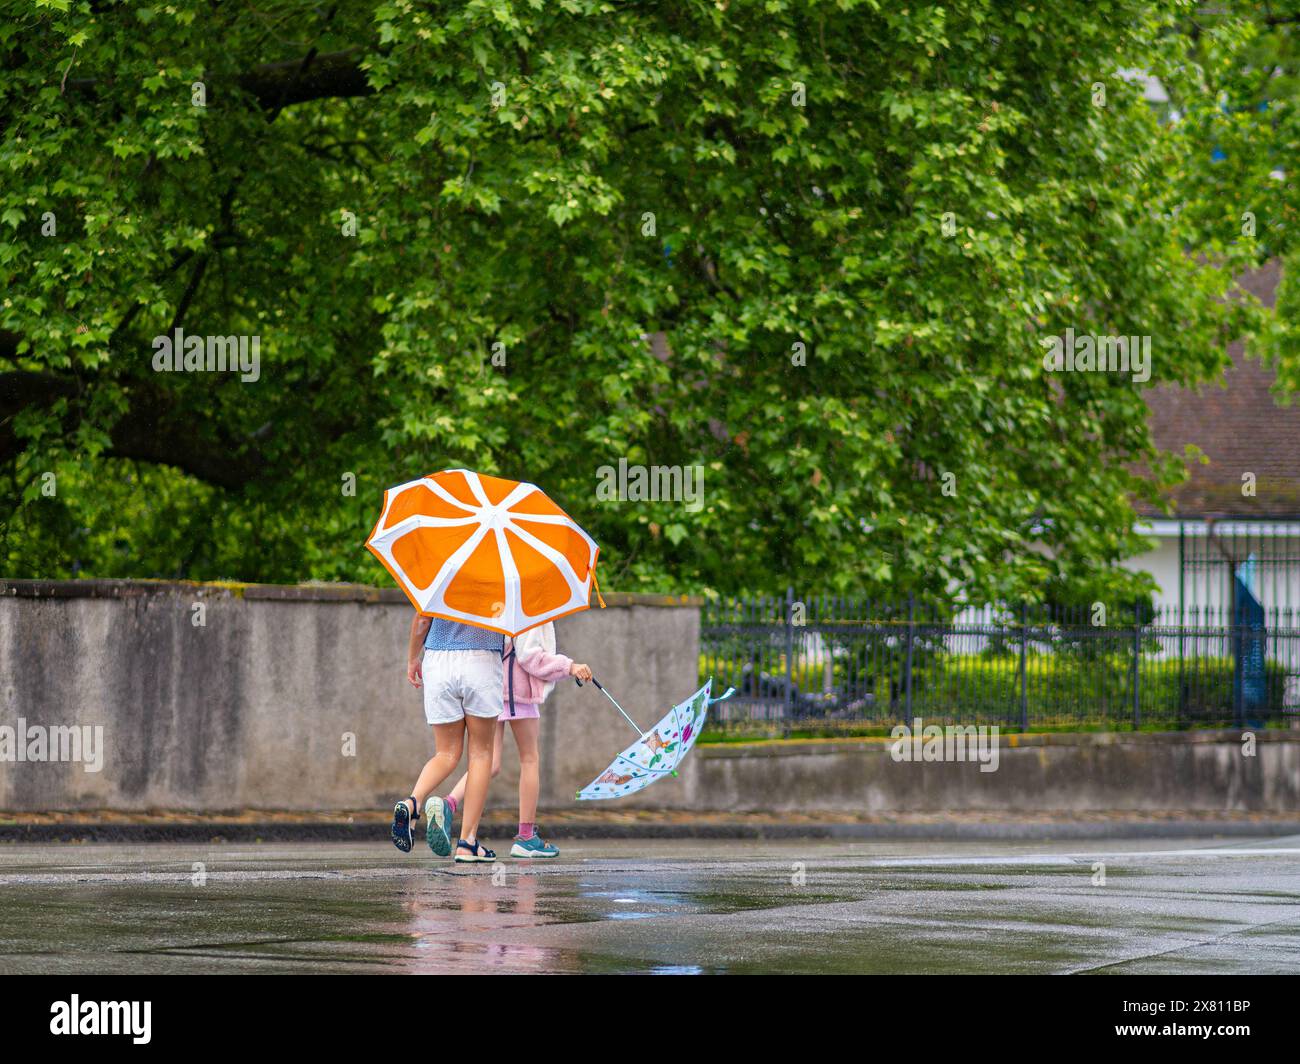 Two individuals walk with colorful umbrellas on wet pavement under green, leafy trees on a rainy day Stock Photo